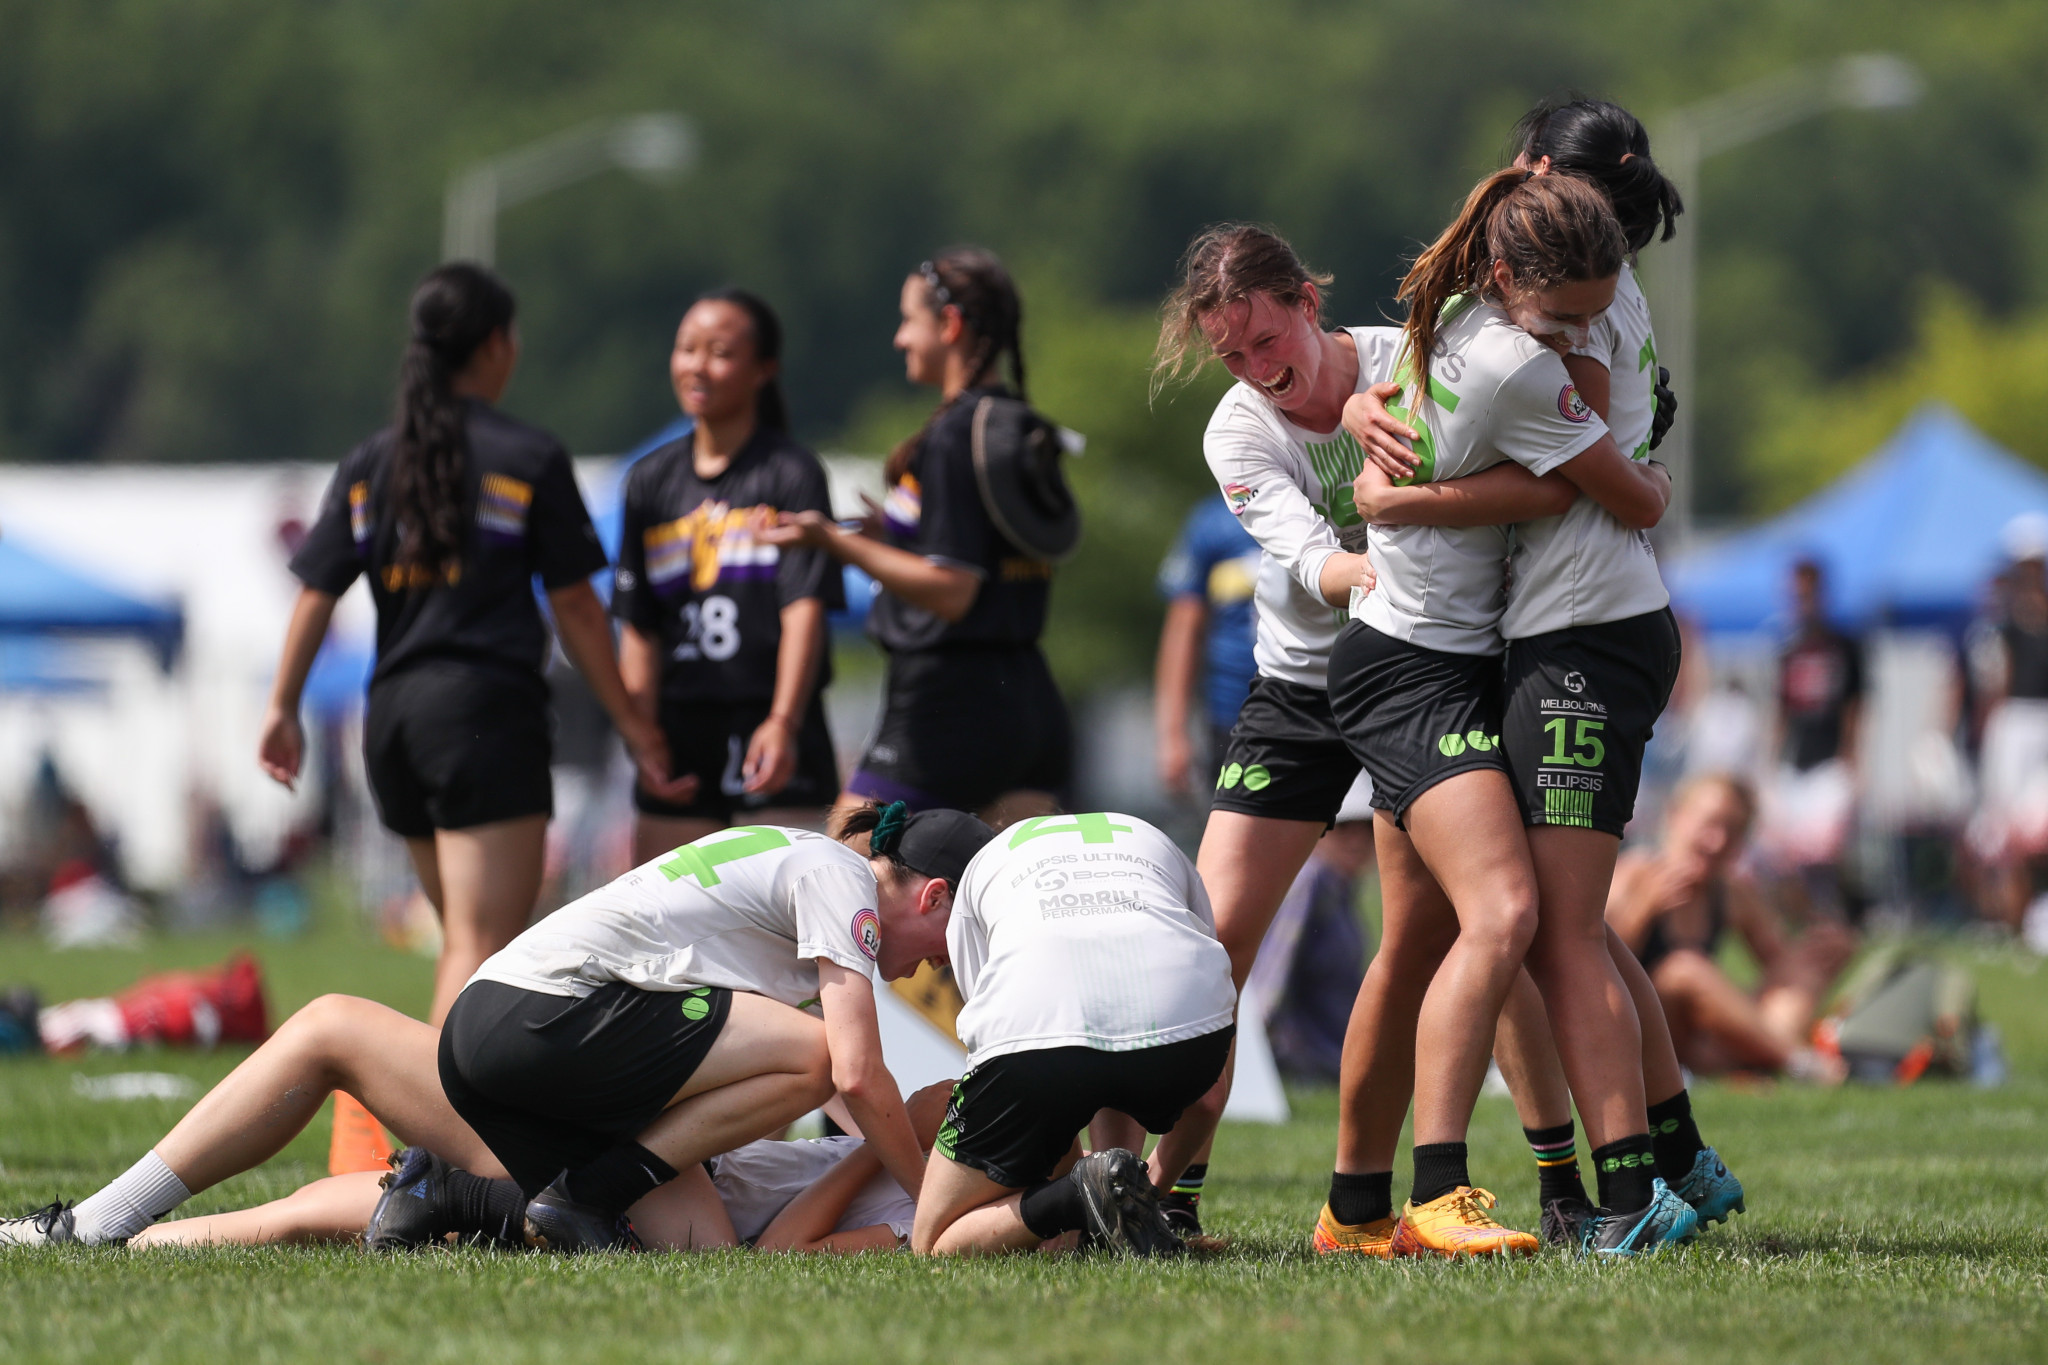 Ellipsis overcame 6ixers to progress to the women's division semi-finals ©Paul Rutherford for UltiPhotos